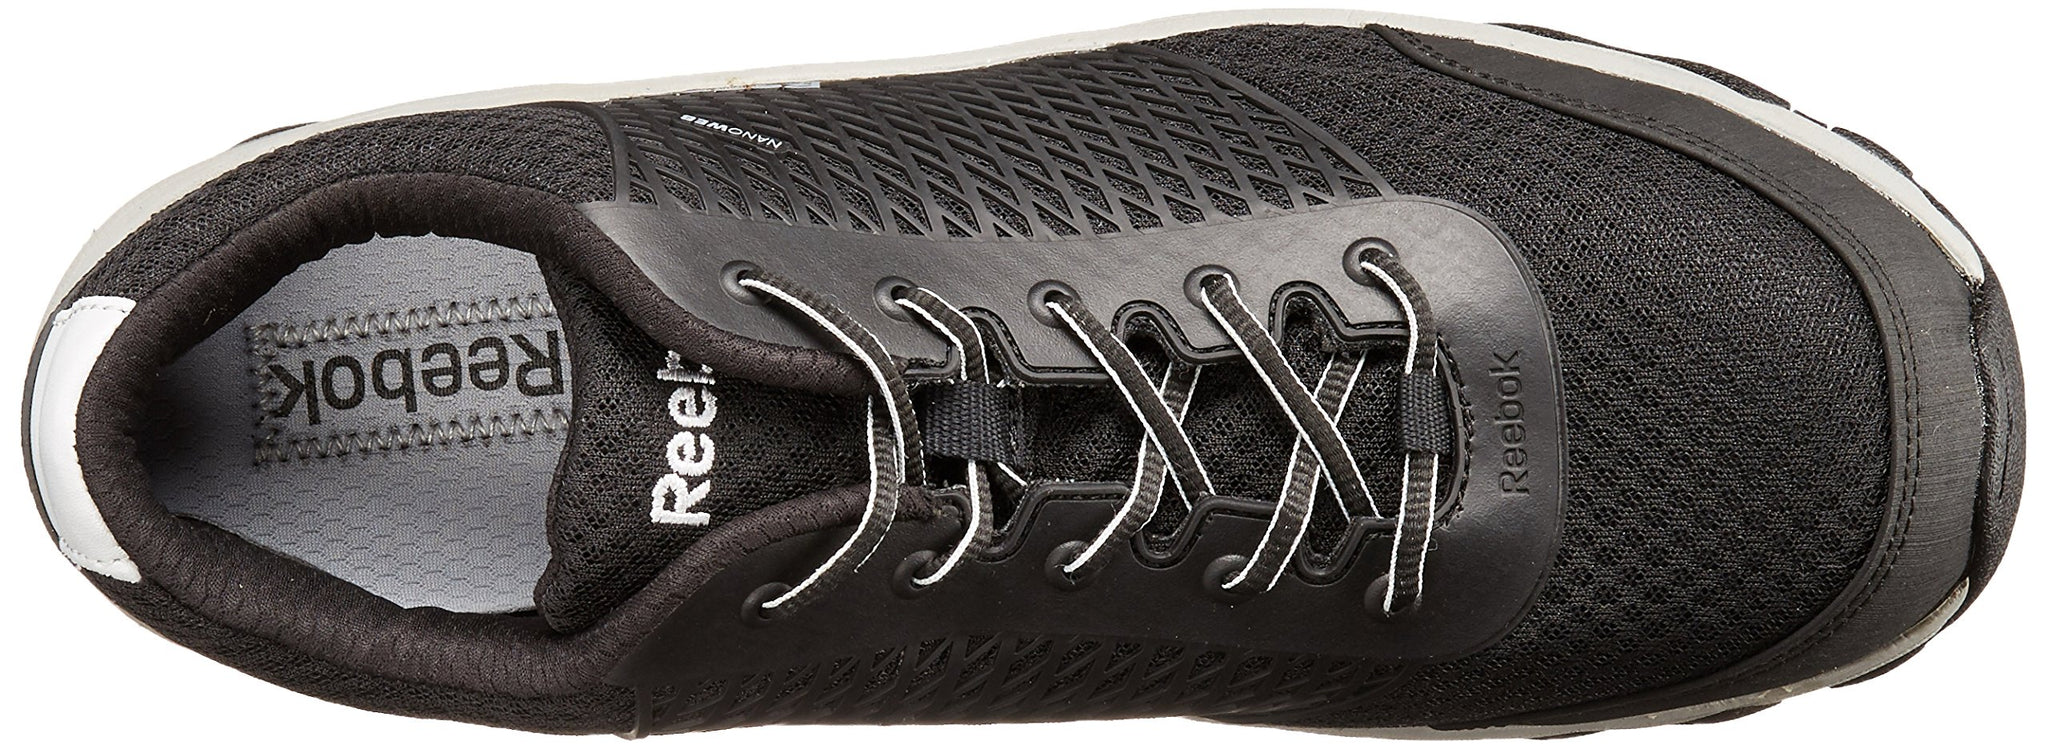 reebok esd safety shoes